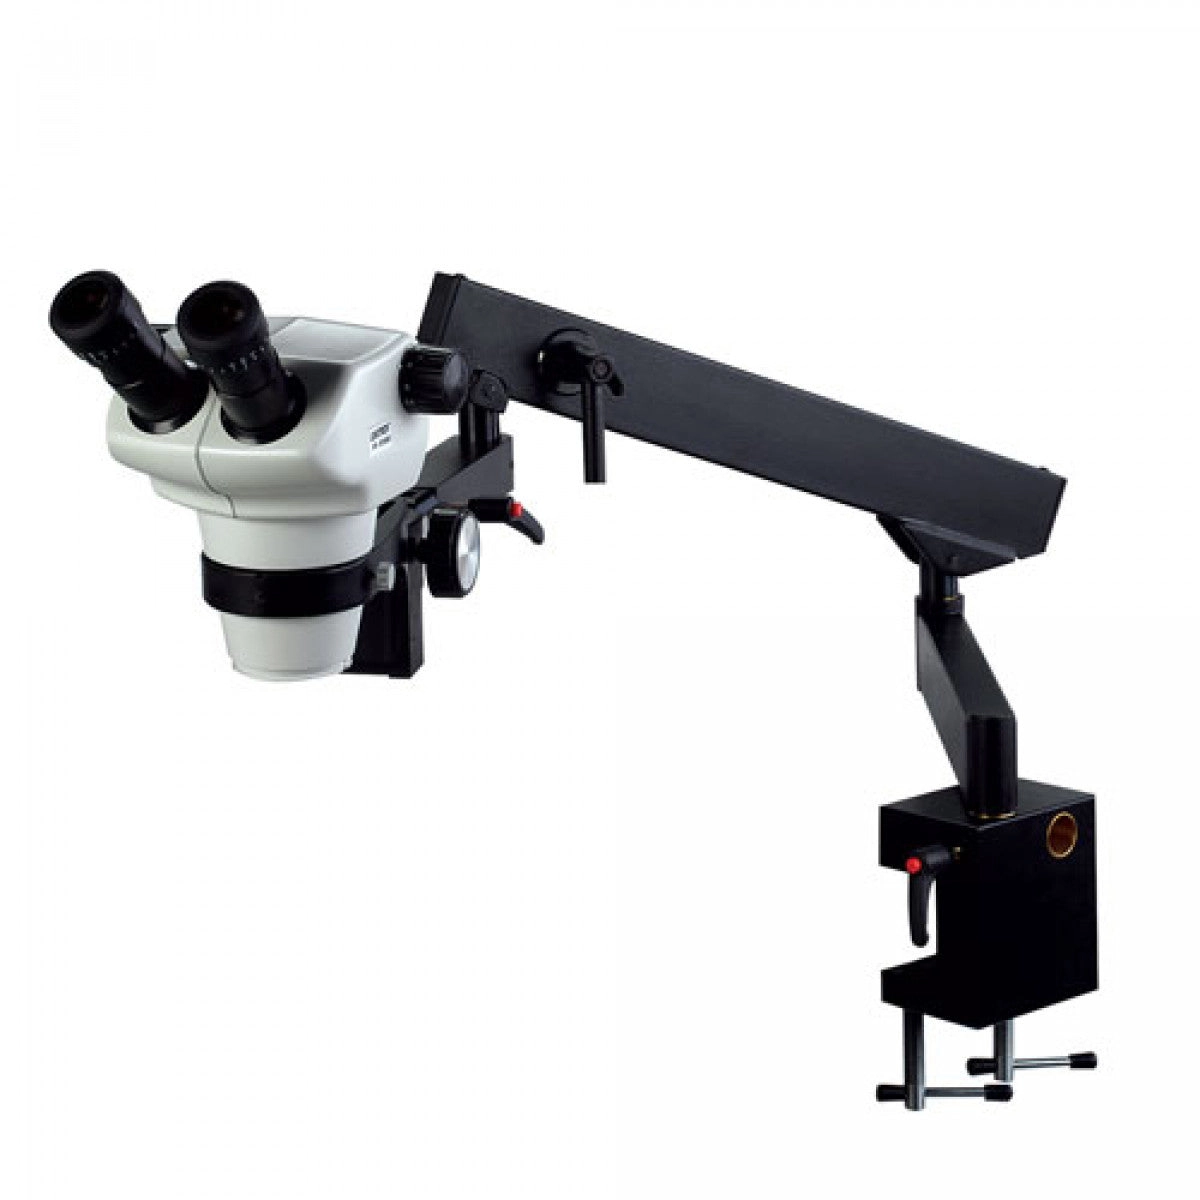 Unitron Z850 Zoom Stereo Microscope On Articulating Arm (Flex-Arm) Stand